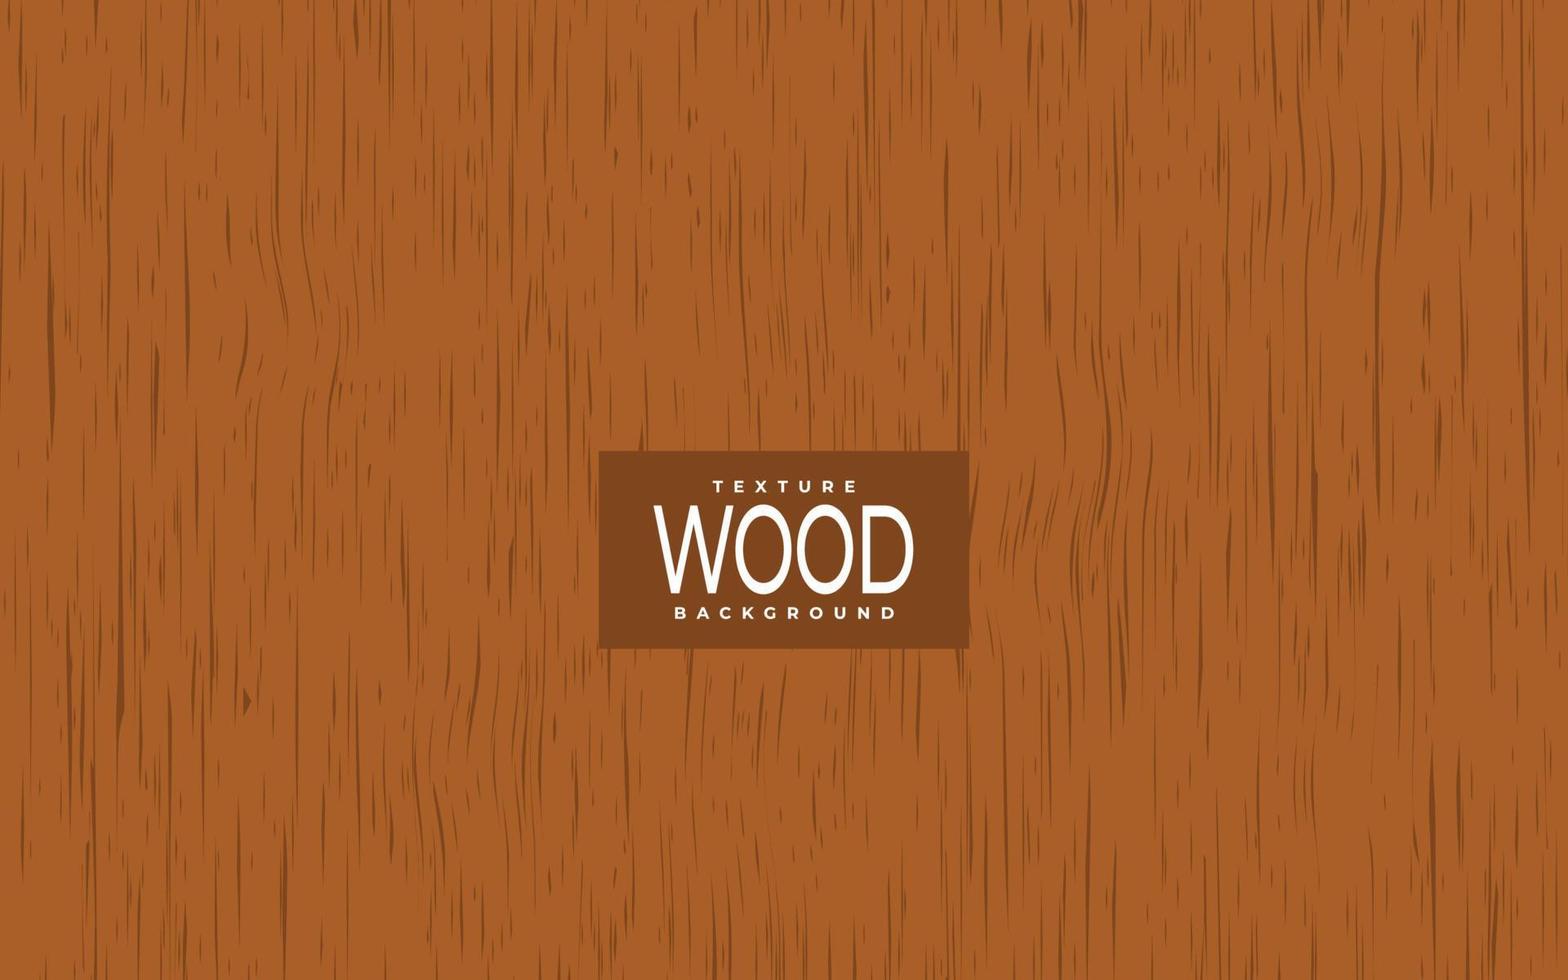 Classic wood texture background Free Vector